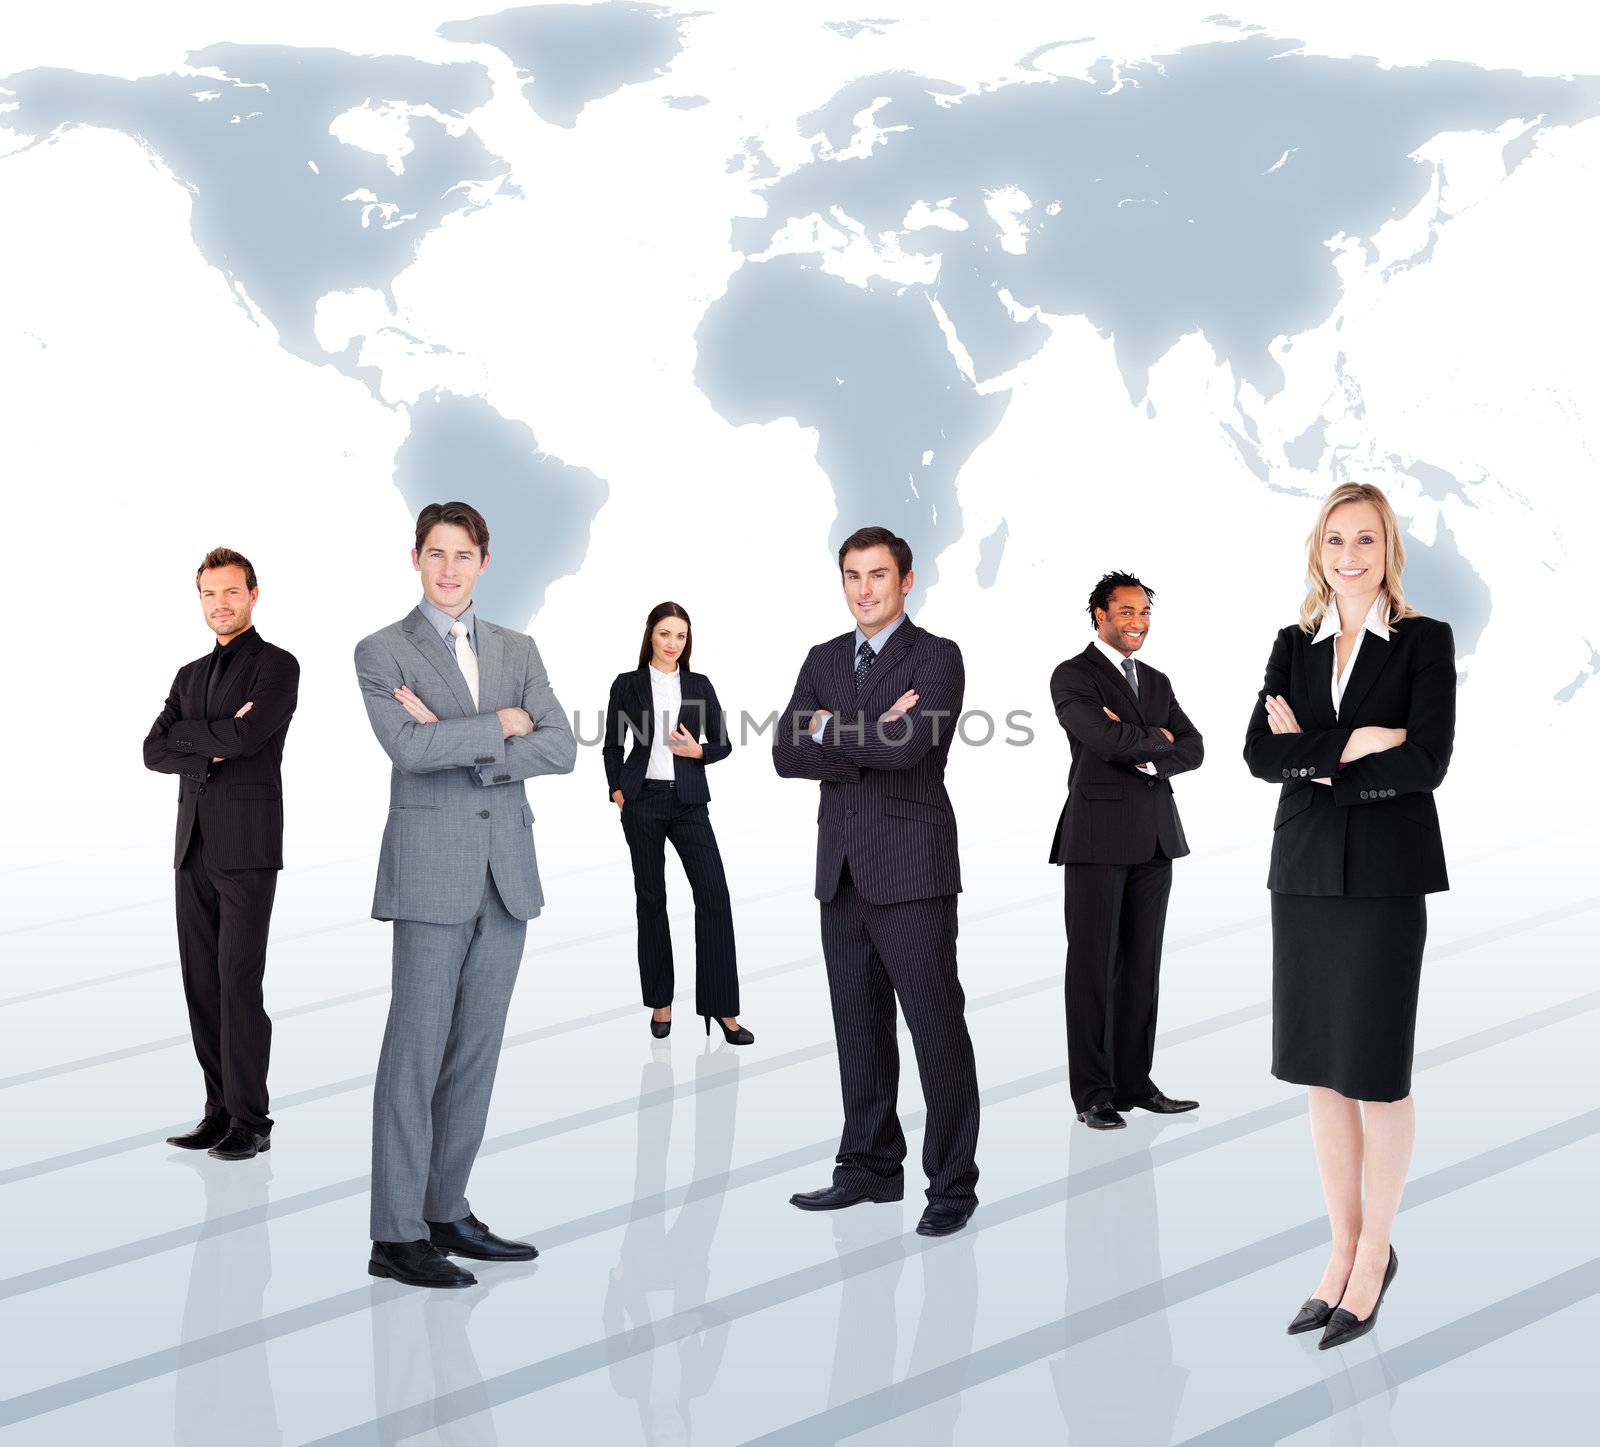 Businesspeople standing against world map by Wavebreakmedia